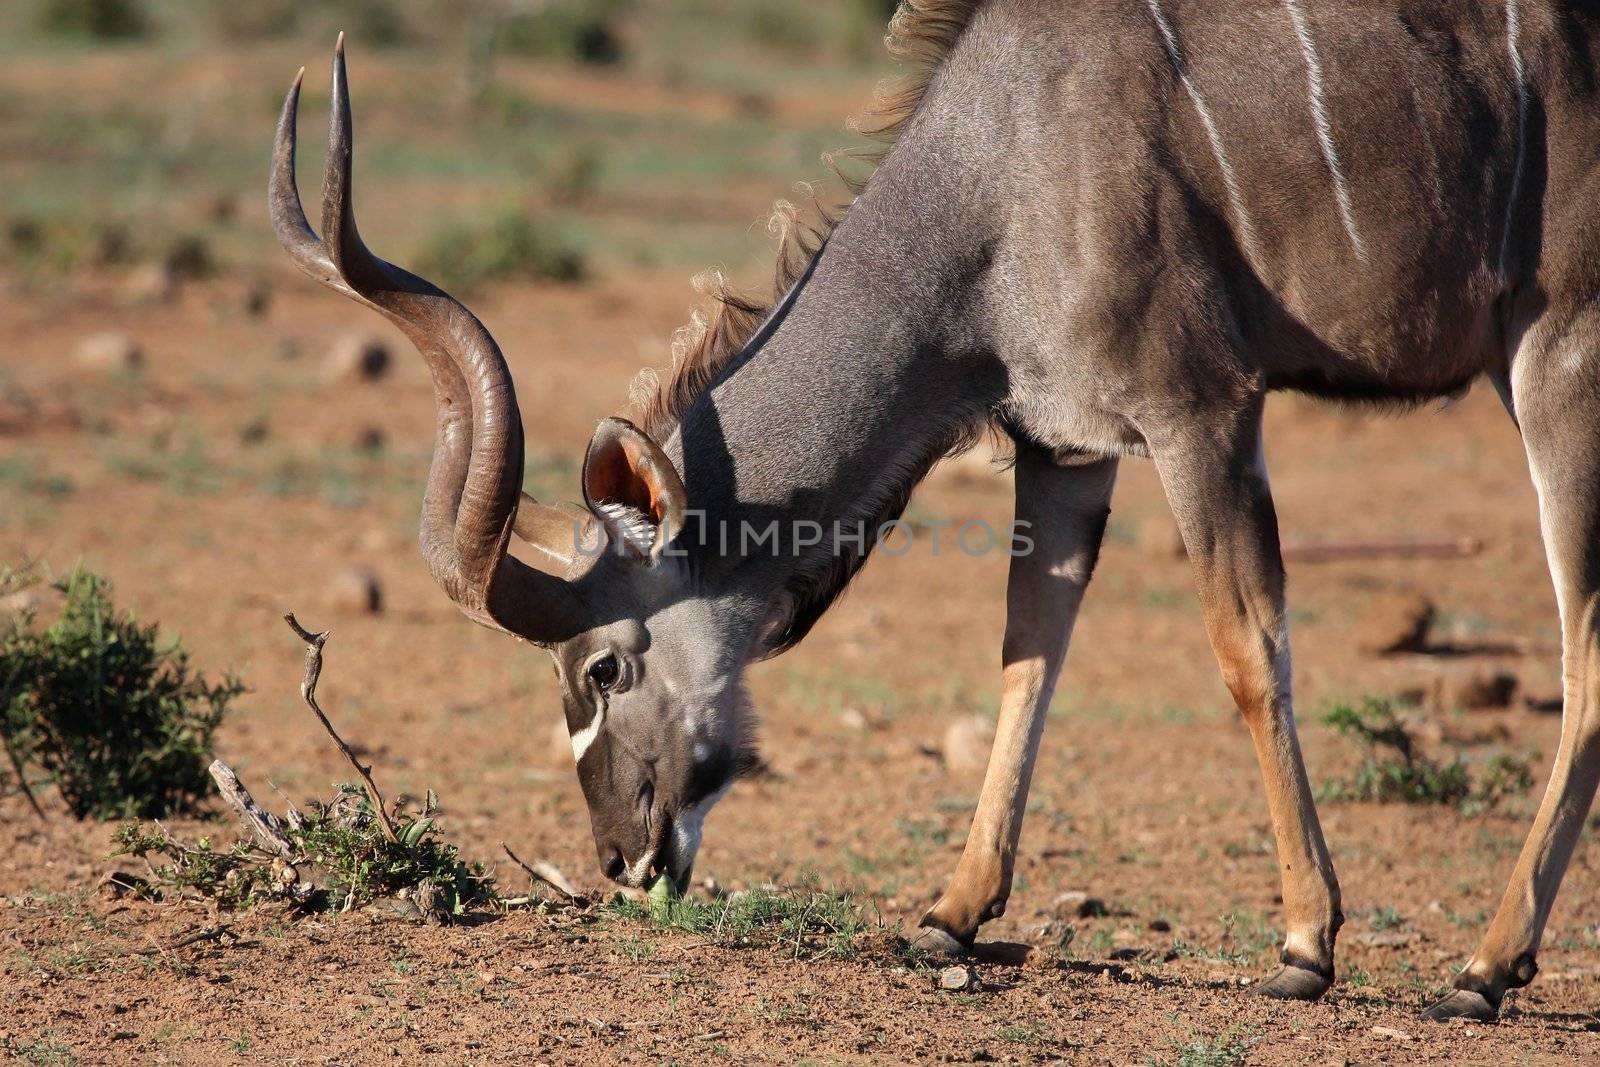 Male Kudu antelope with beautiful spiralled horns eating plant shoots